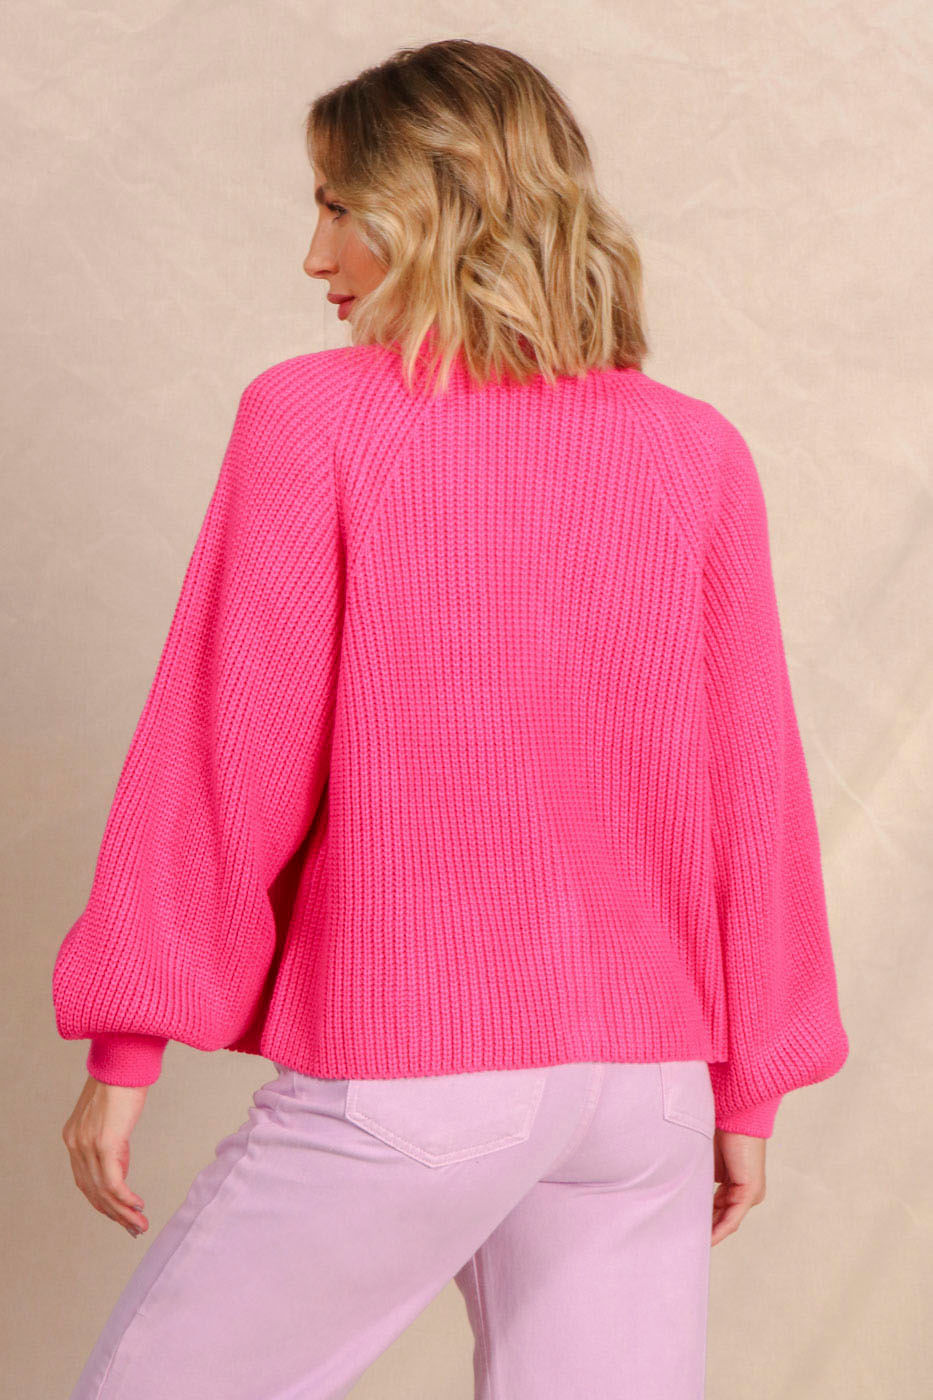 20154-CASACO-TRICOT-PINK_2